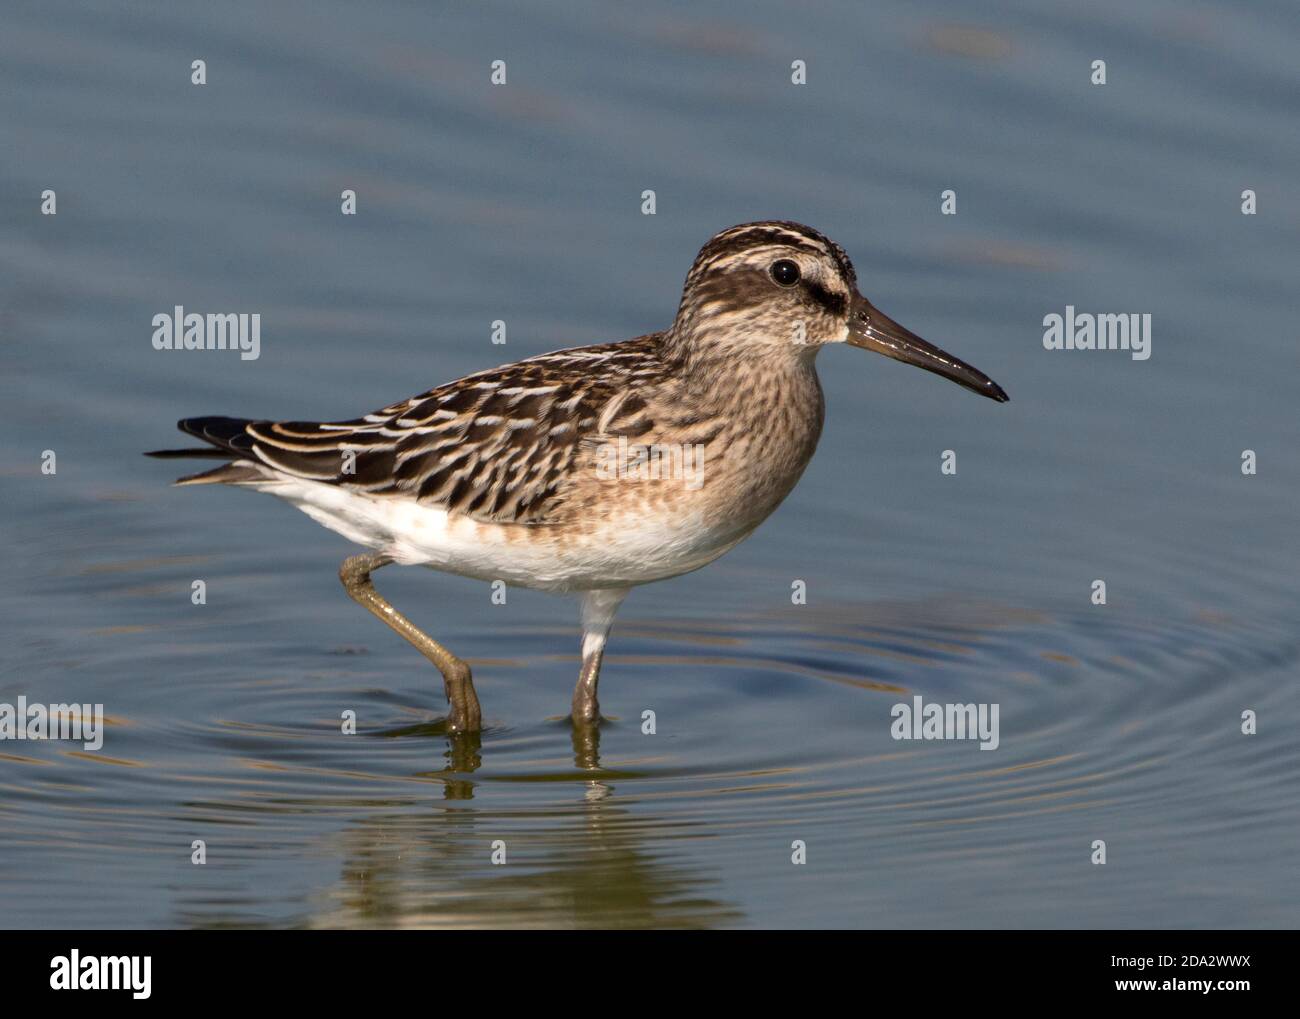 broad-billed sandpiper (Calidris falcinellus, Limicola falcinellus), foraging in a freshwater pool, Greece, Lesbos Stock Photo